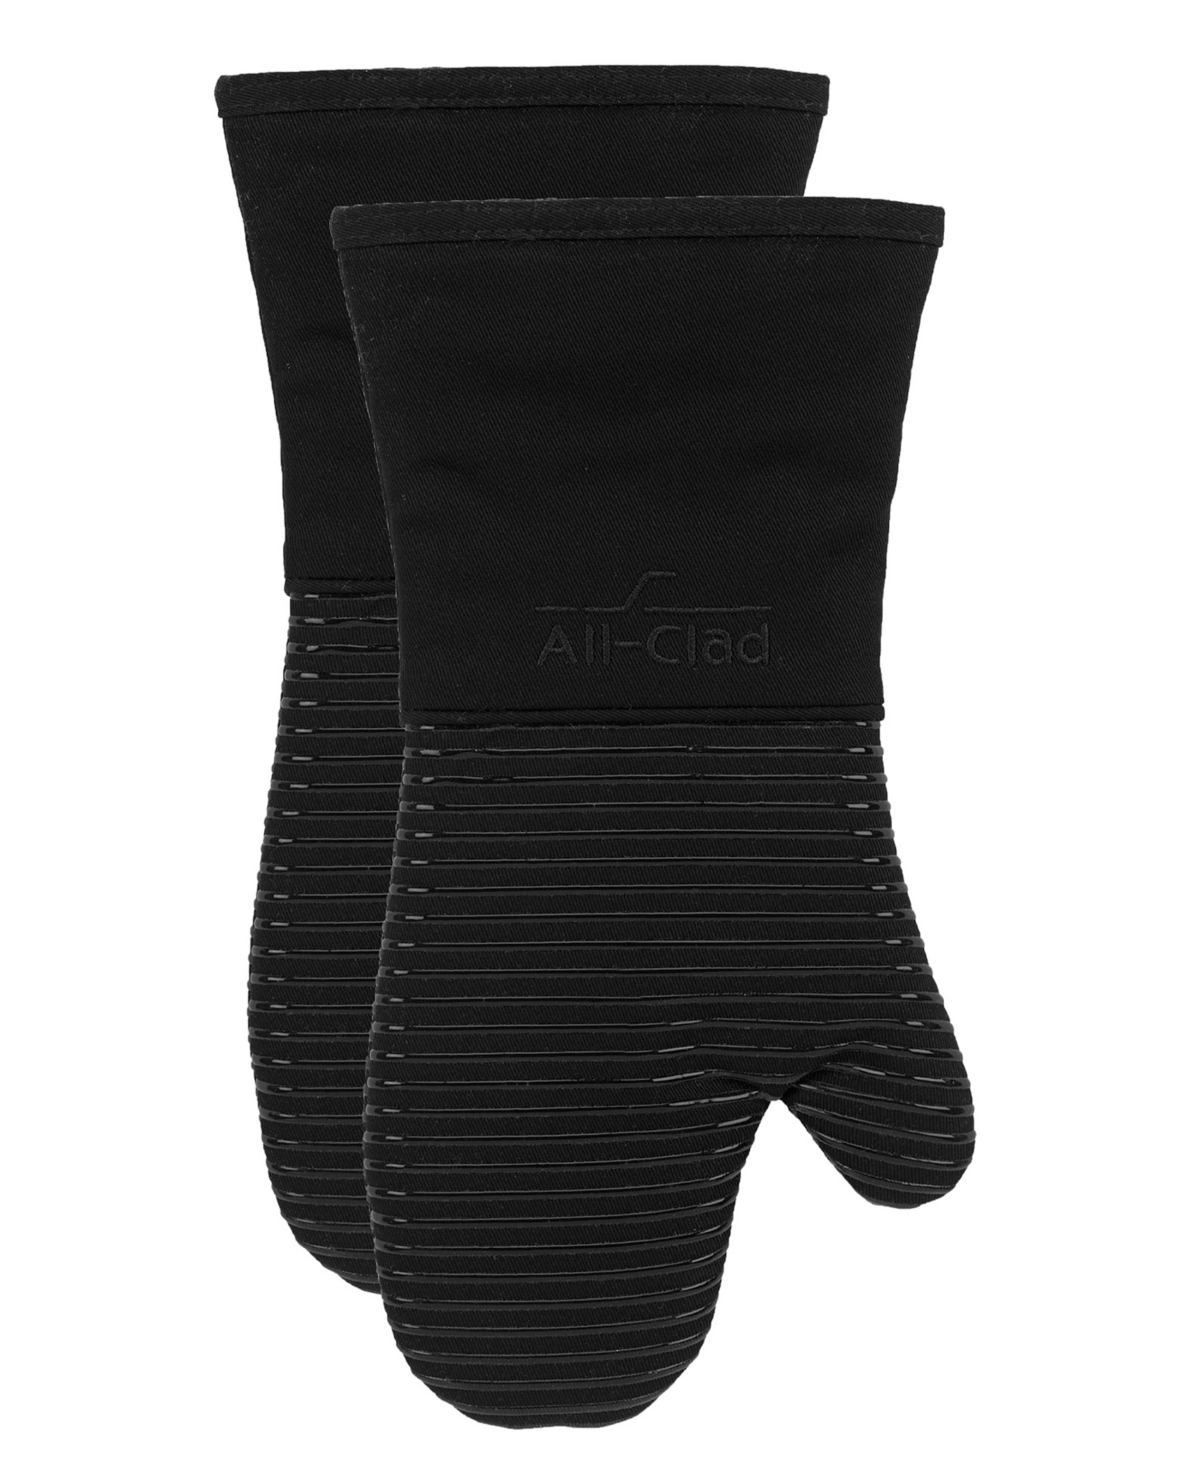 All-clad Ribbed Silicone Cotton Twill Oven Mitt, Set Of 2 In Black